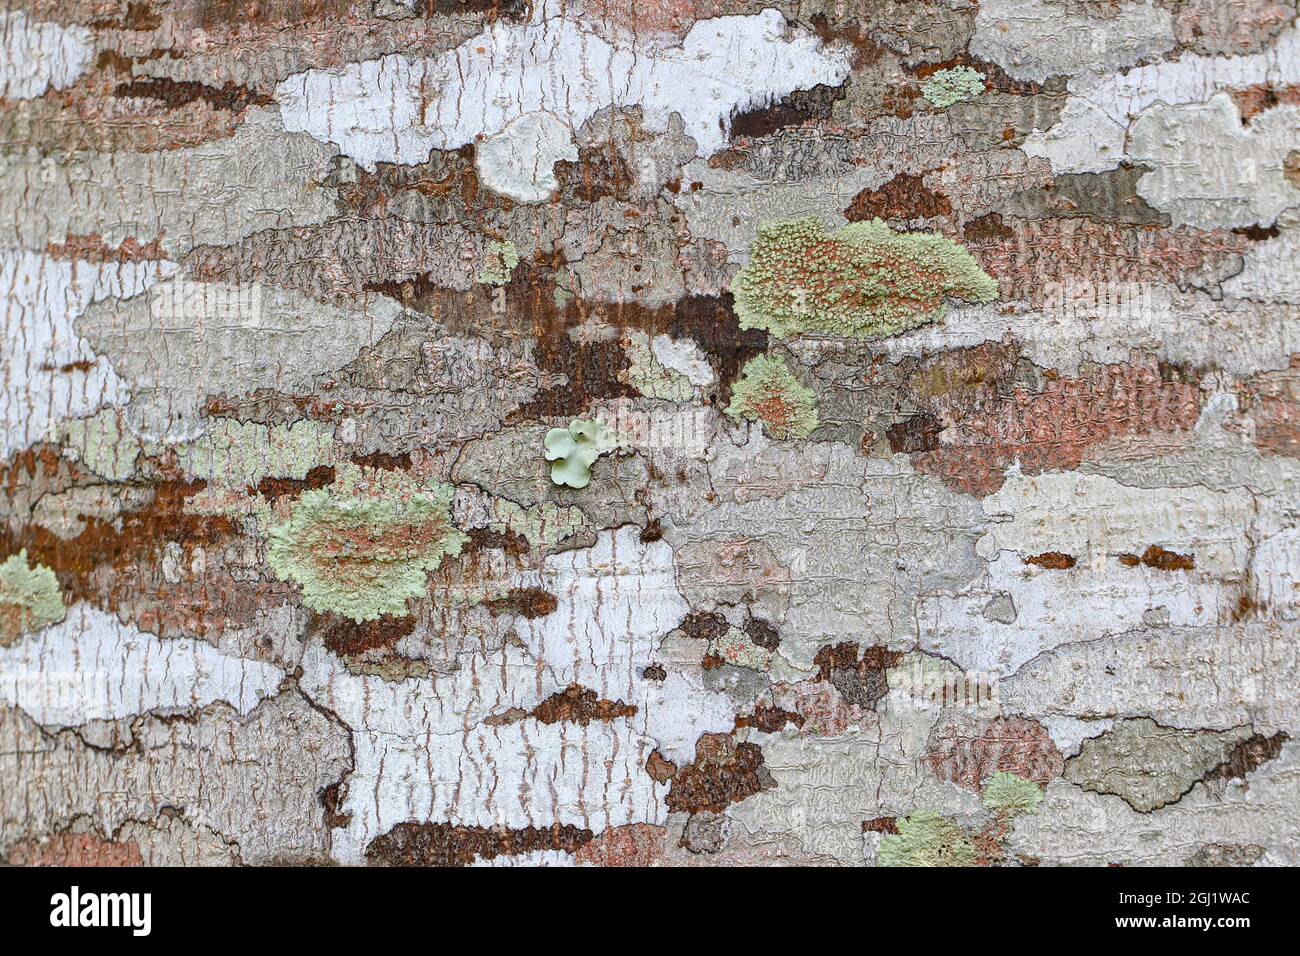 Detail on tree bark (Vernicia fordii) show camouflage pattern from lichen growing on tree bark Stock Photo